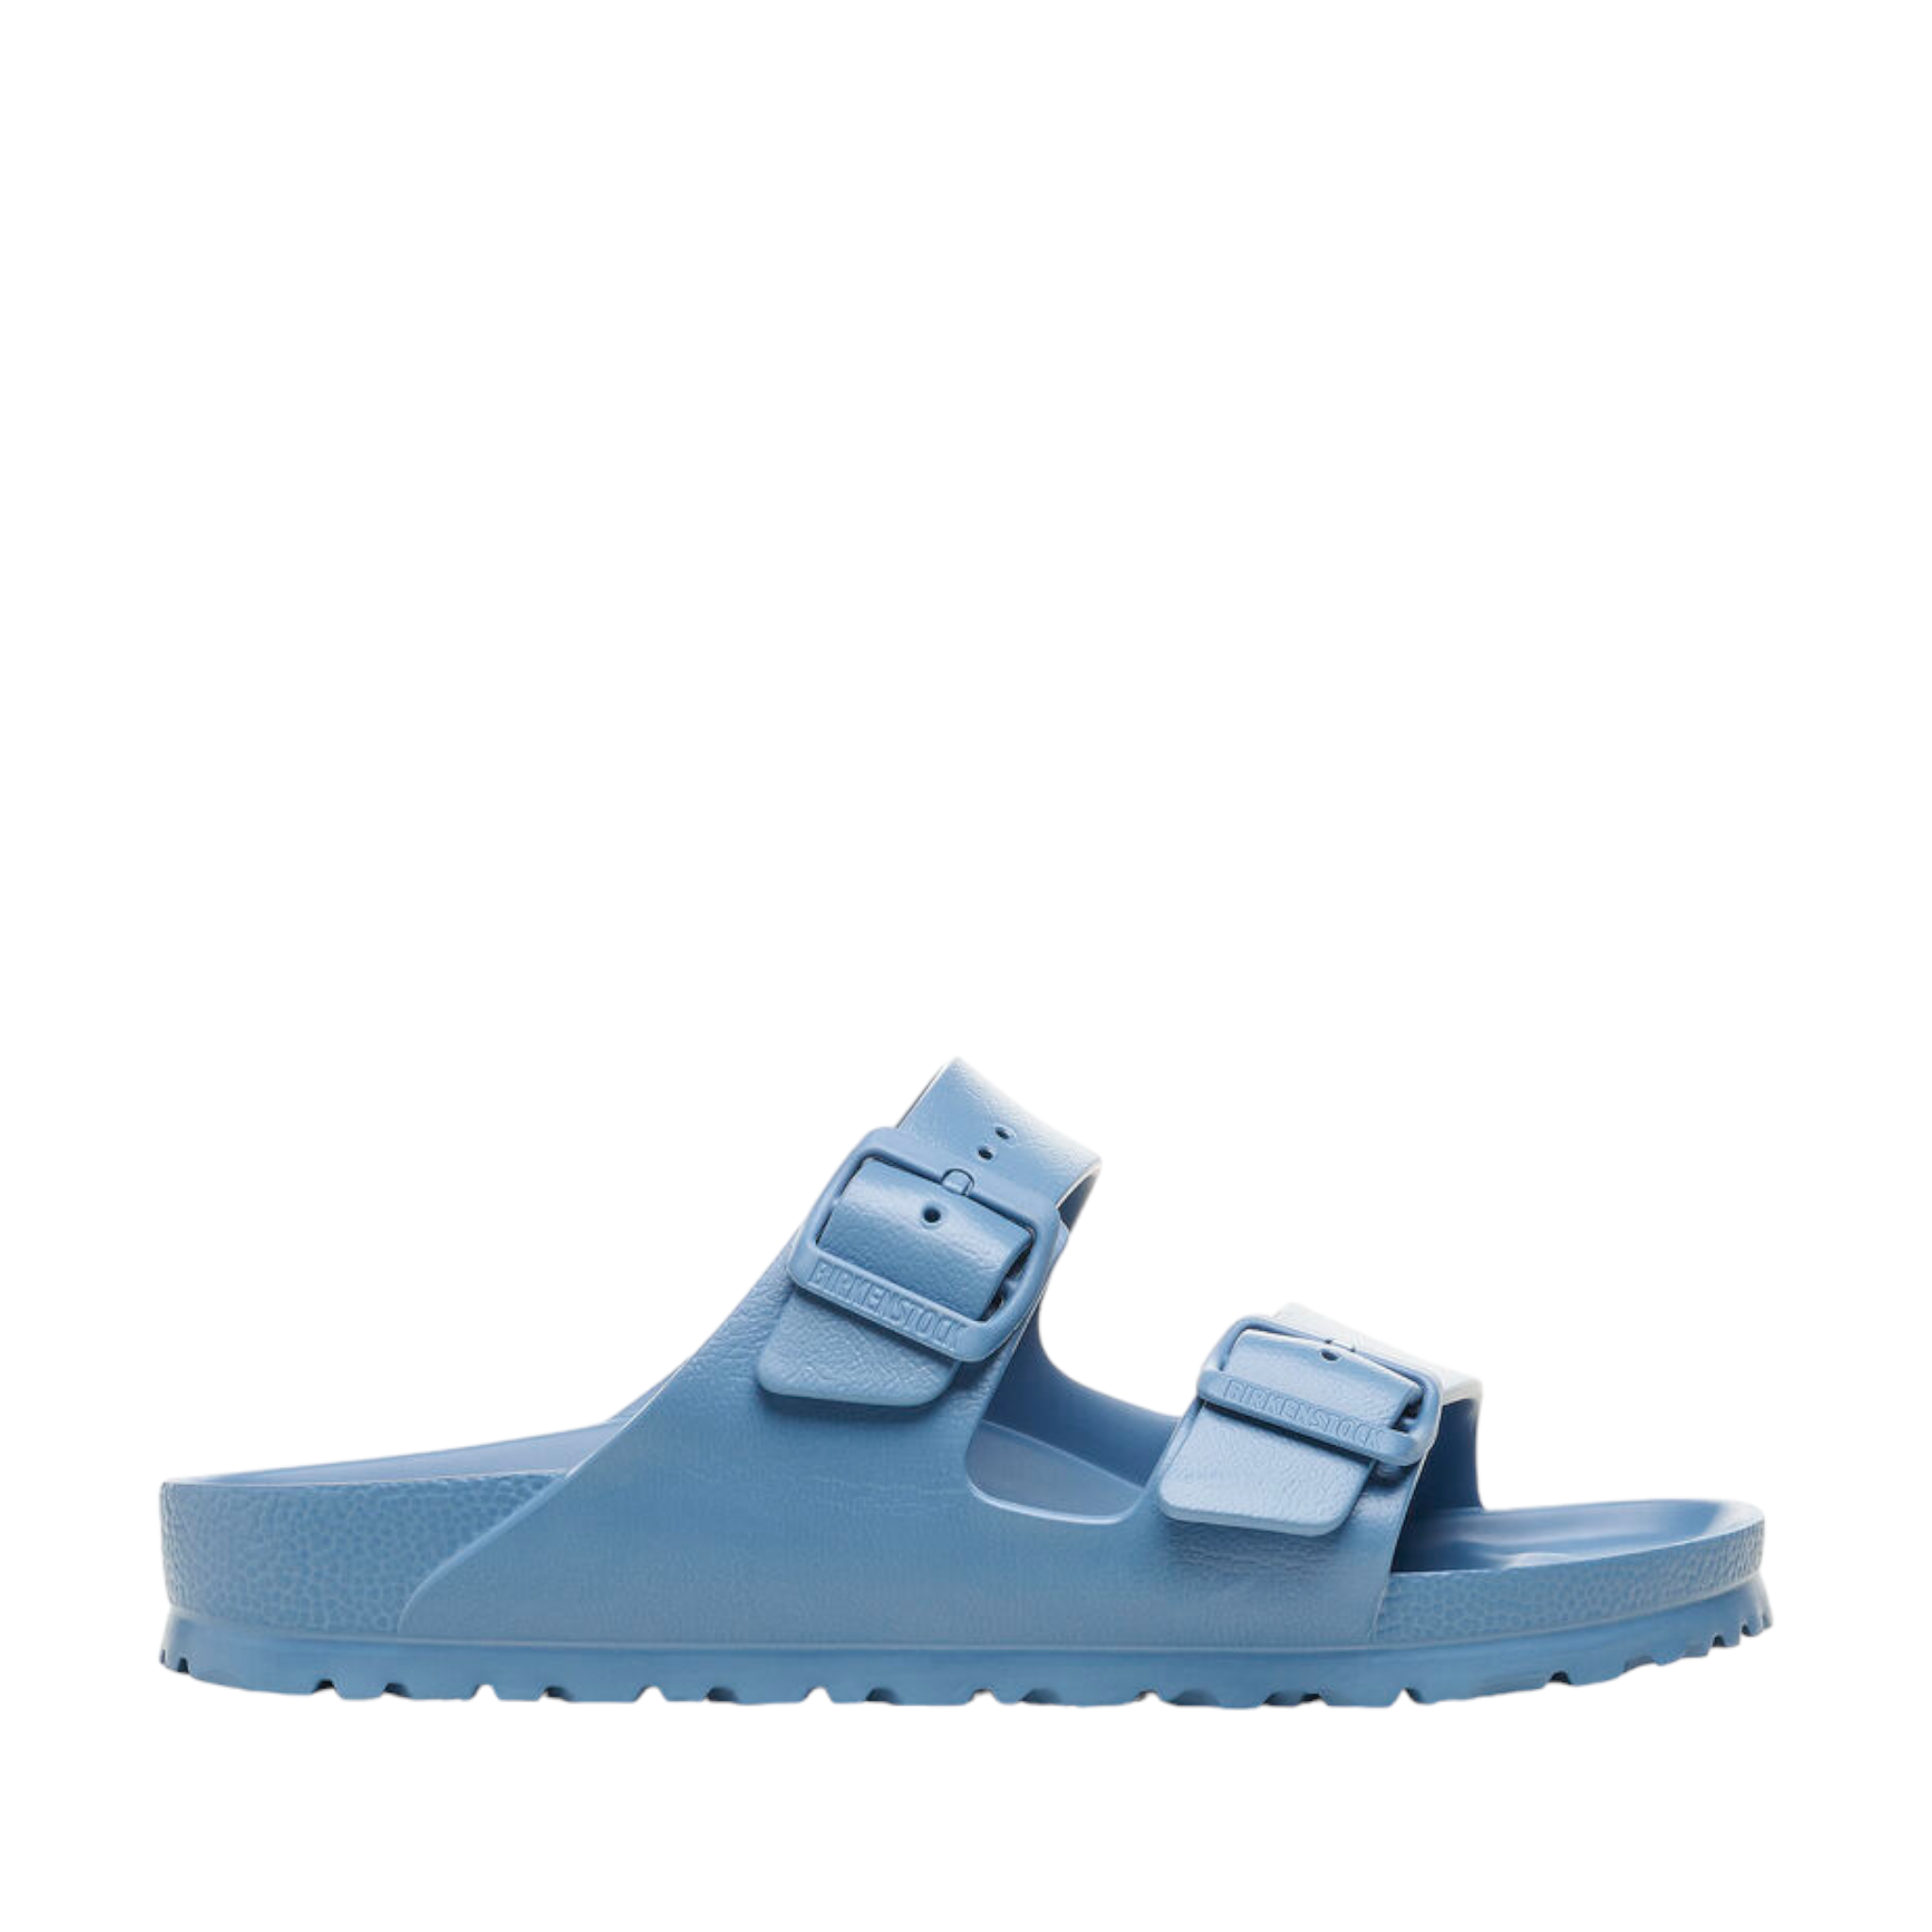 Side angle view of Elemental blue Arizona Sandal from Birkenstock. Two buckles straps over the top of the foot. Buckle is blue. Shop Online and In-store with shoe&amp;me Mount Maunganui. 